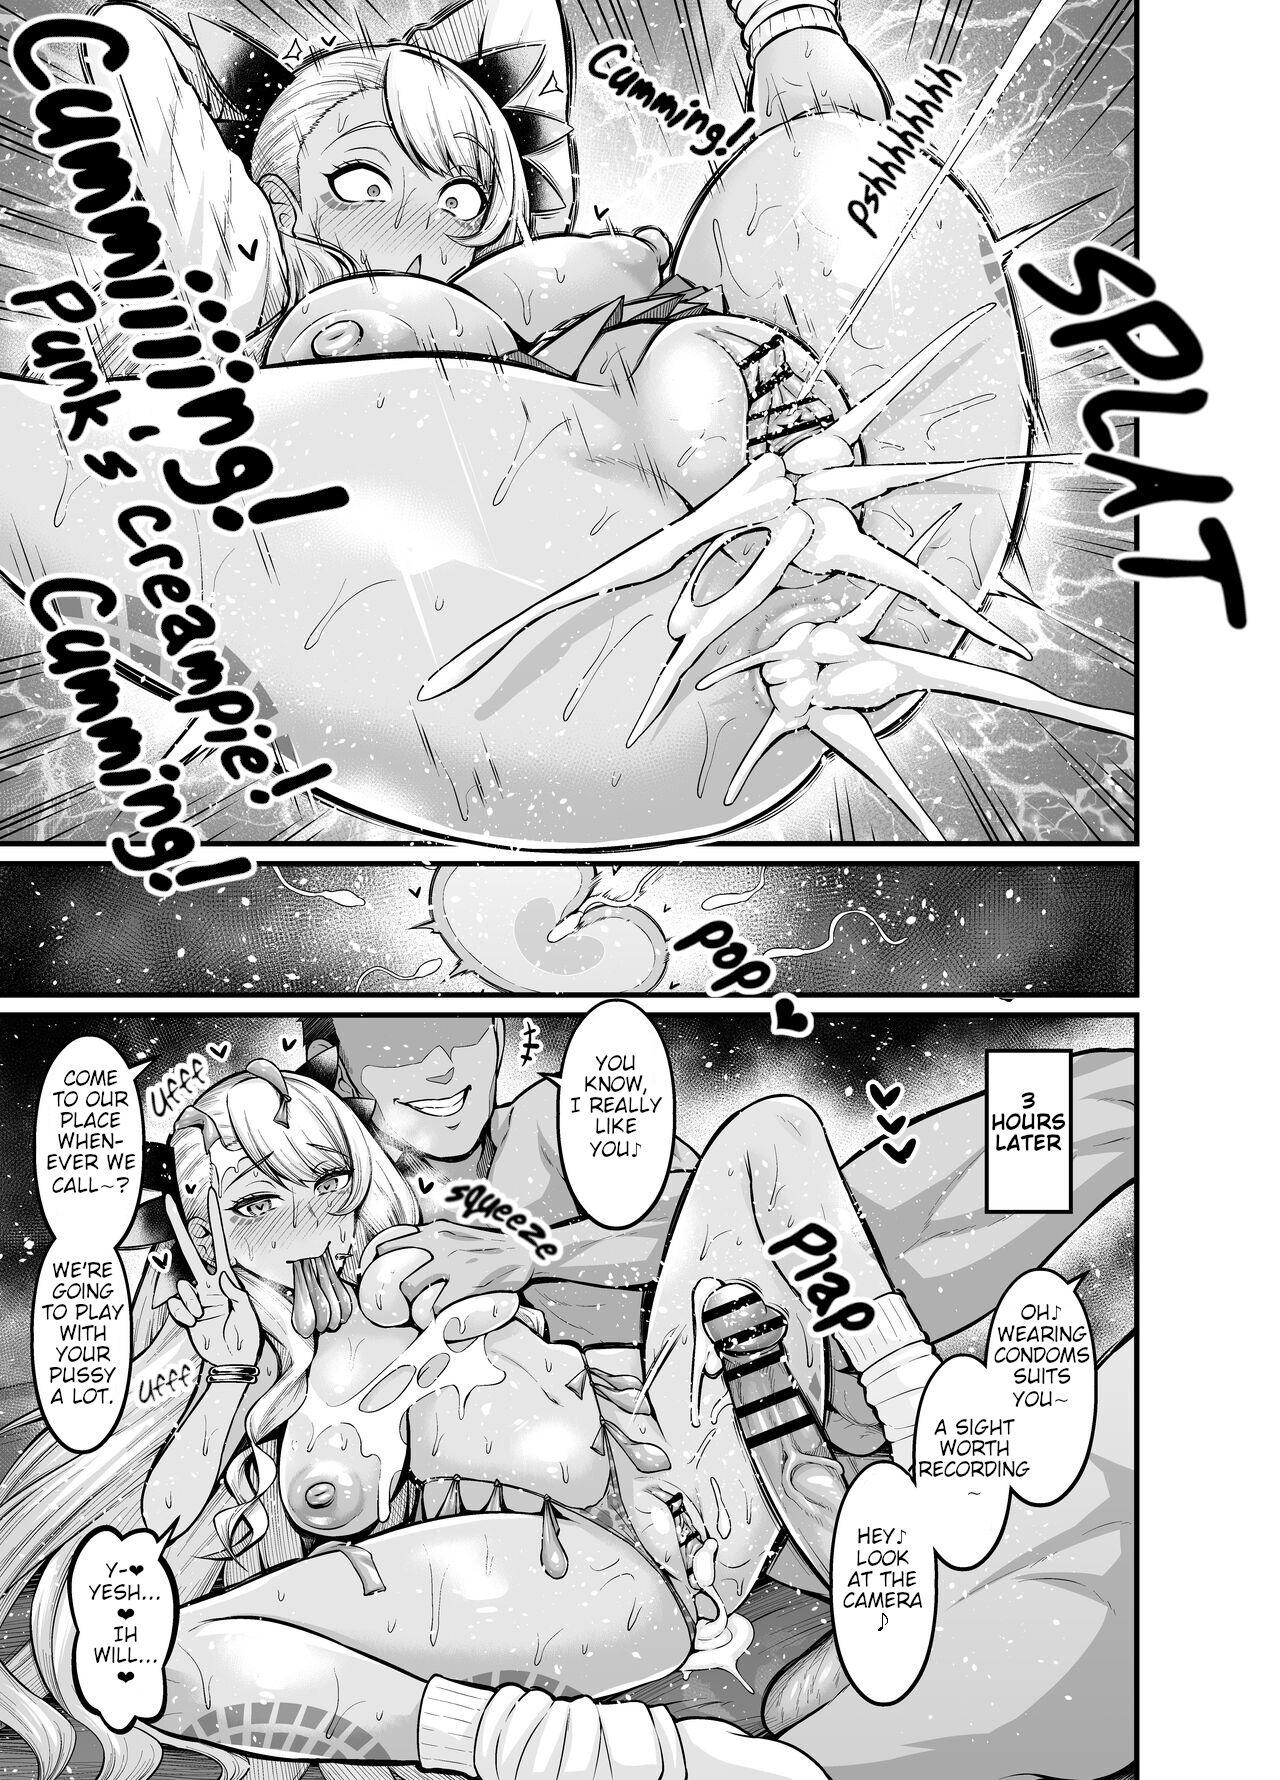 Gayemo Evil Dragon, stress relief in Shinjuku - Fate grand order Movies - Page 5